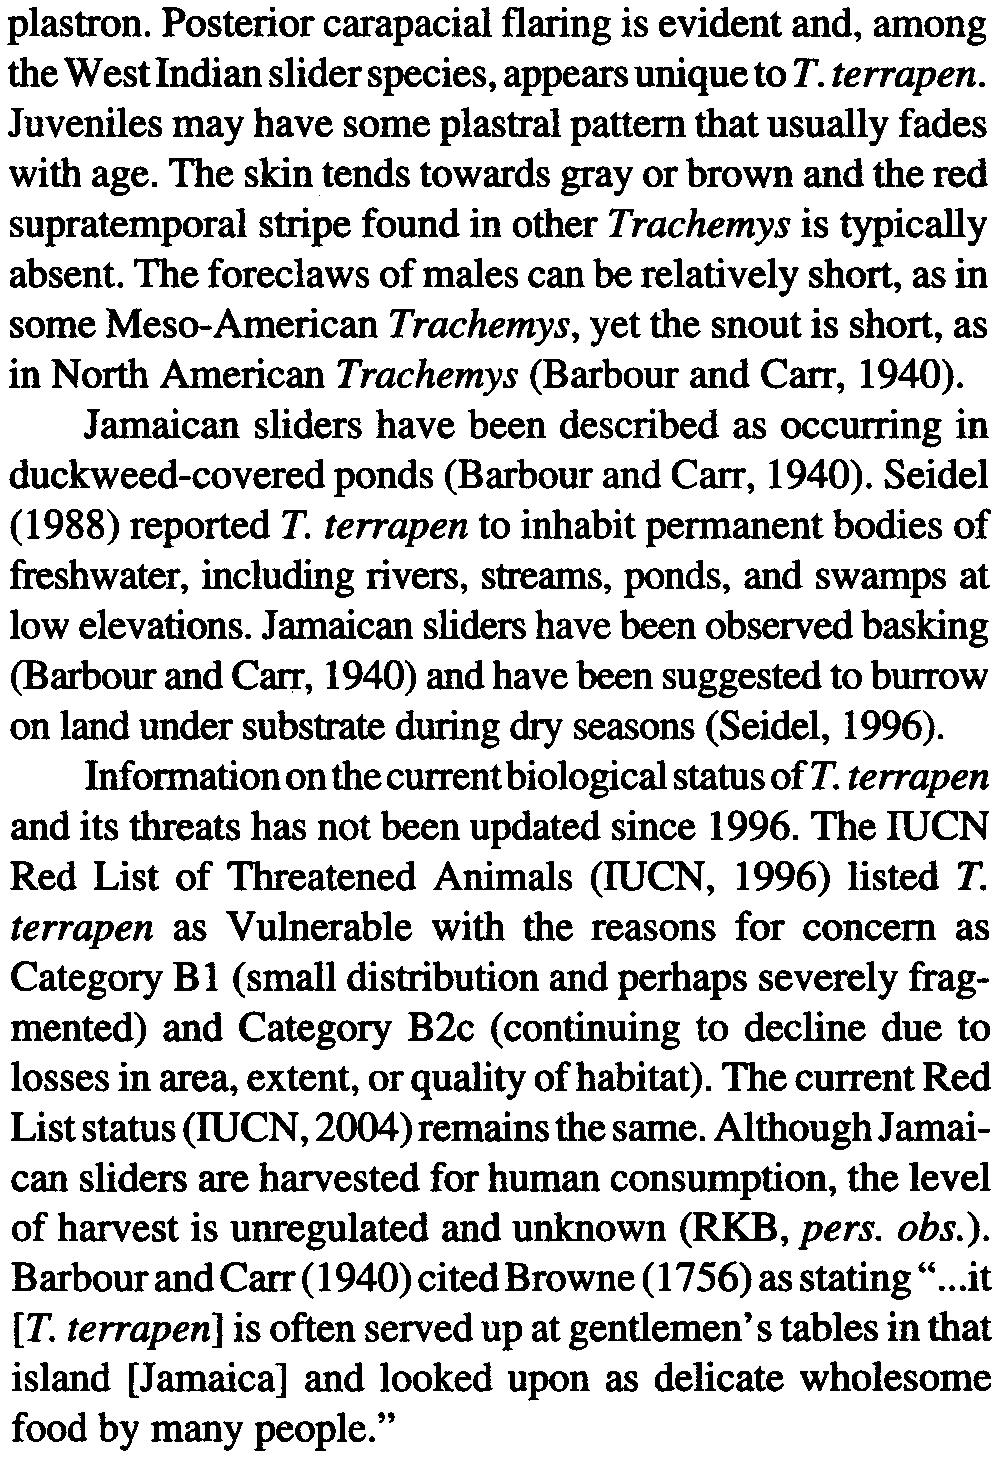 -We investigated populations of the Jamaican slider turtle (Trachemys terrapen), a species apparently endemic to Jamaica and the only native freshwater turtle species known to occur there.